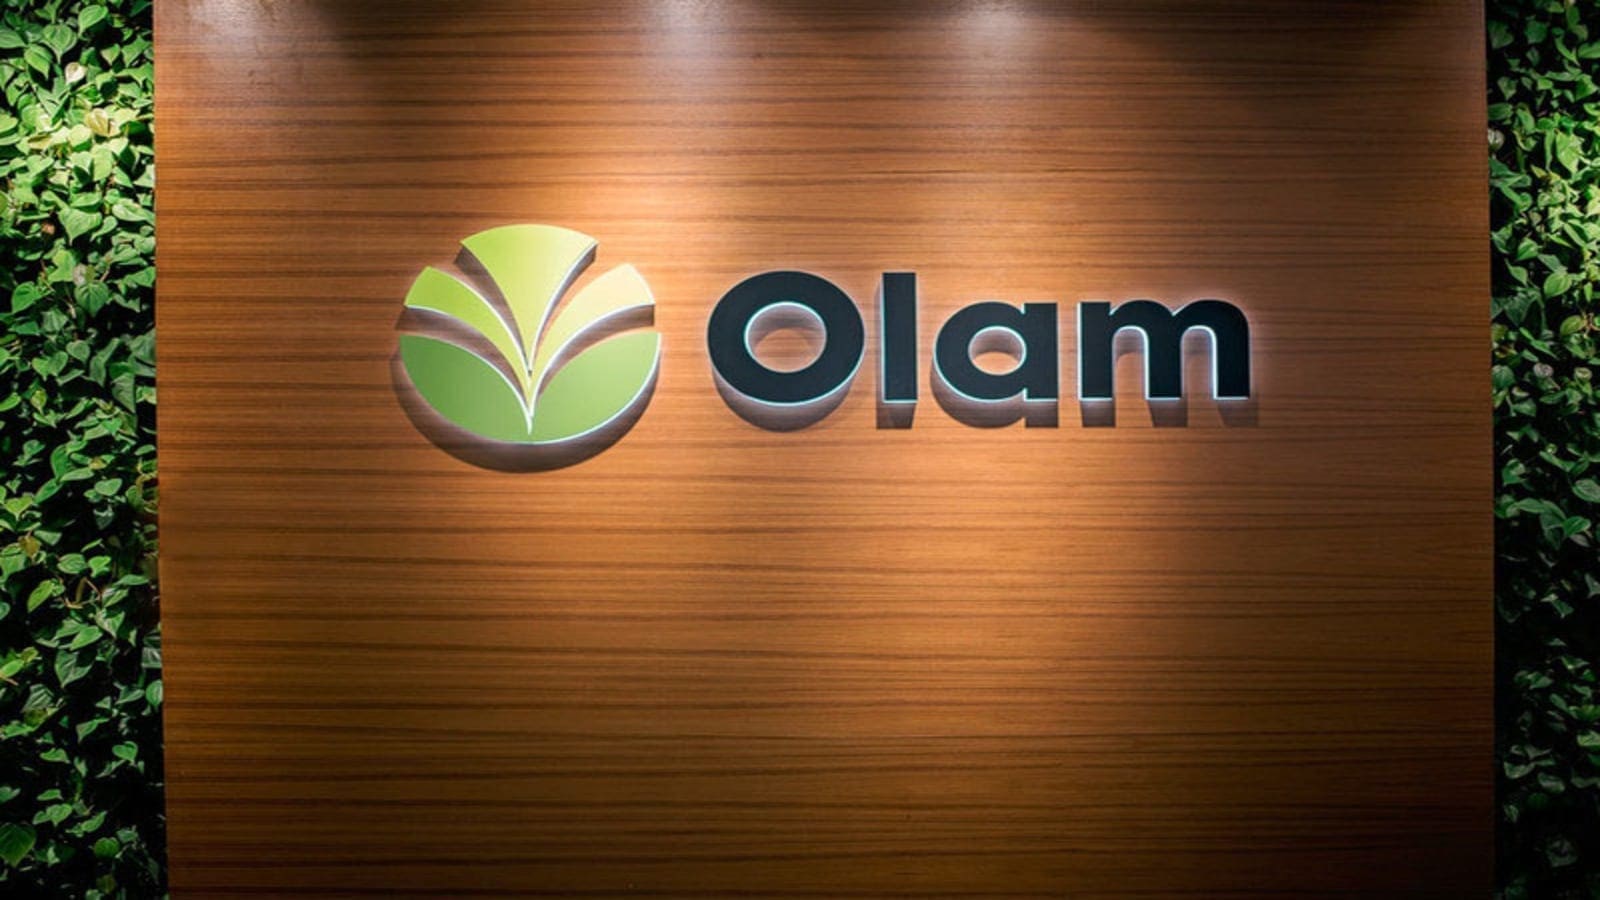 Olam reorganization delivers strong full year results with profits surging 179 percent 